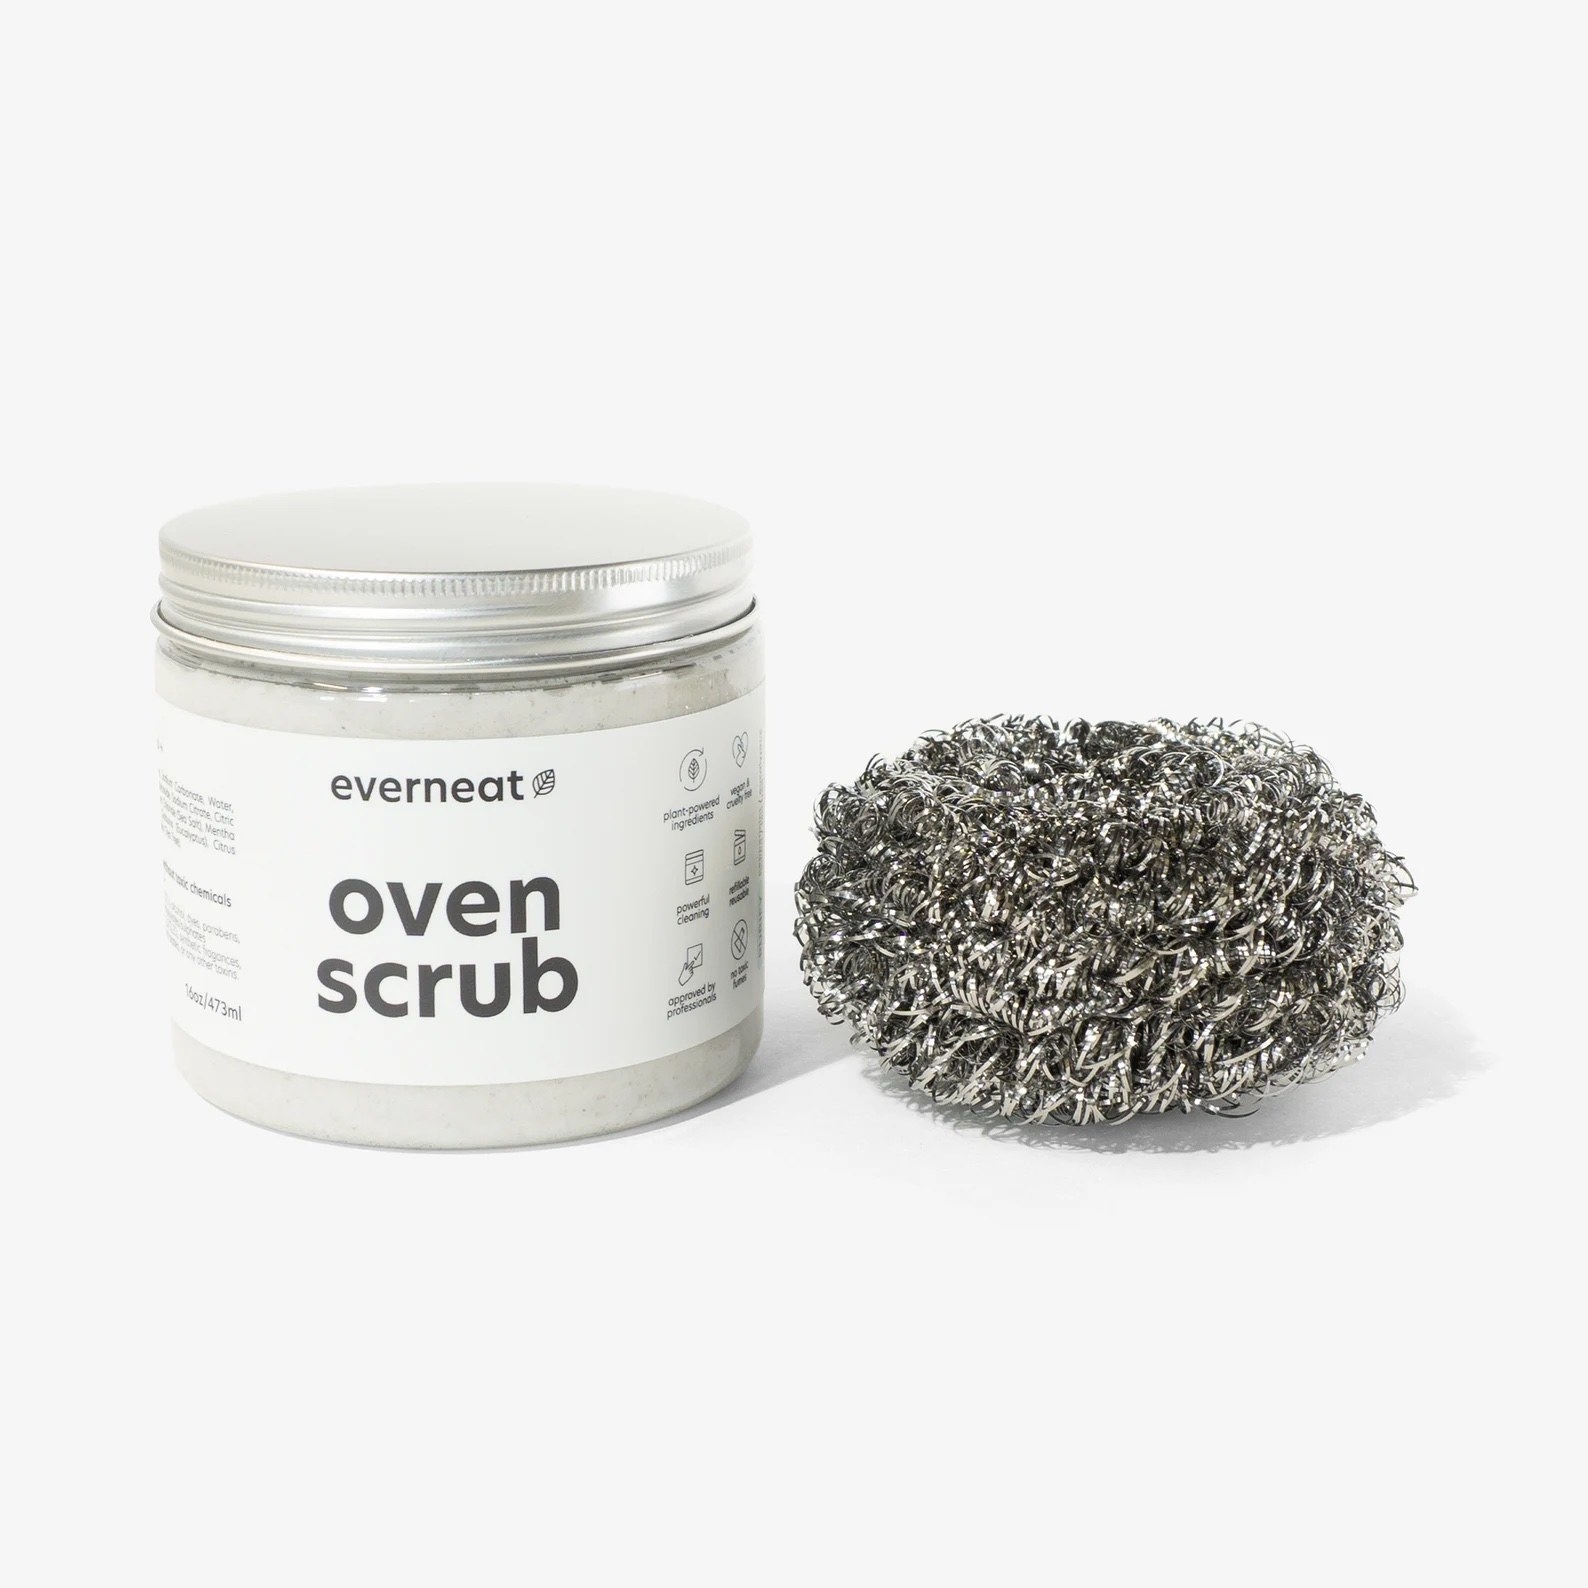 A white jar of oven cleaner and a silver metal sponge